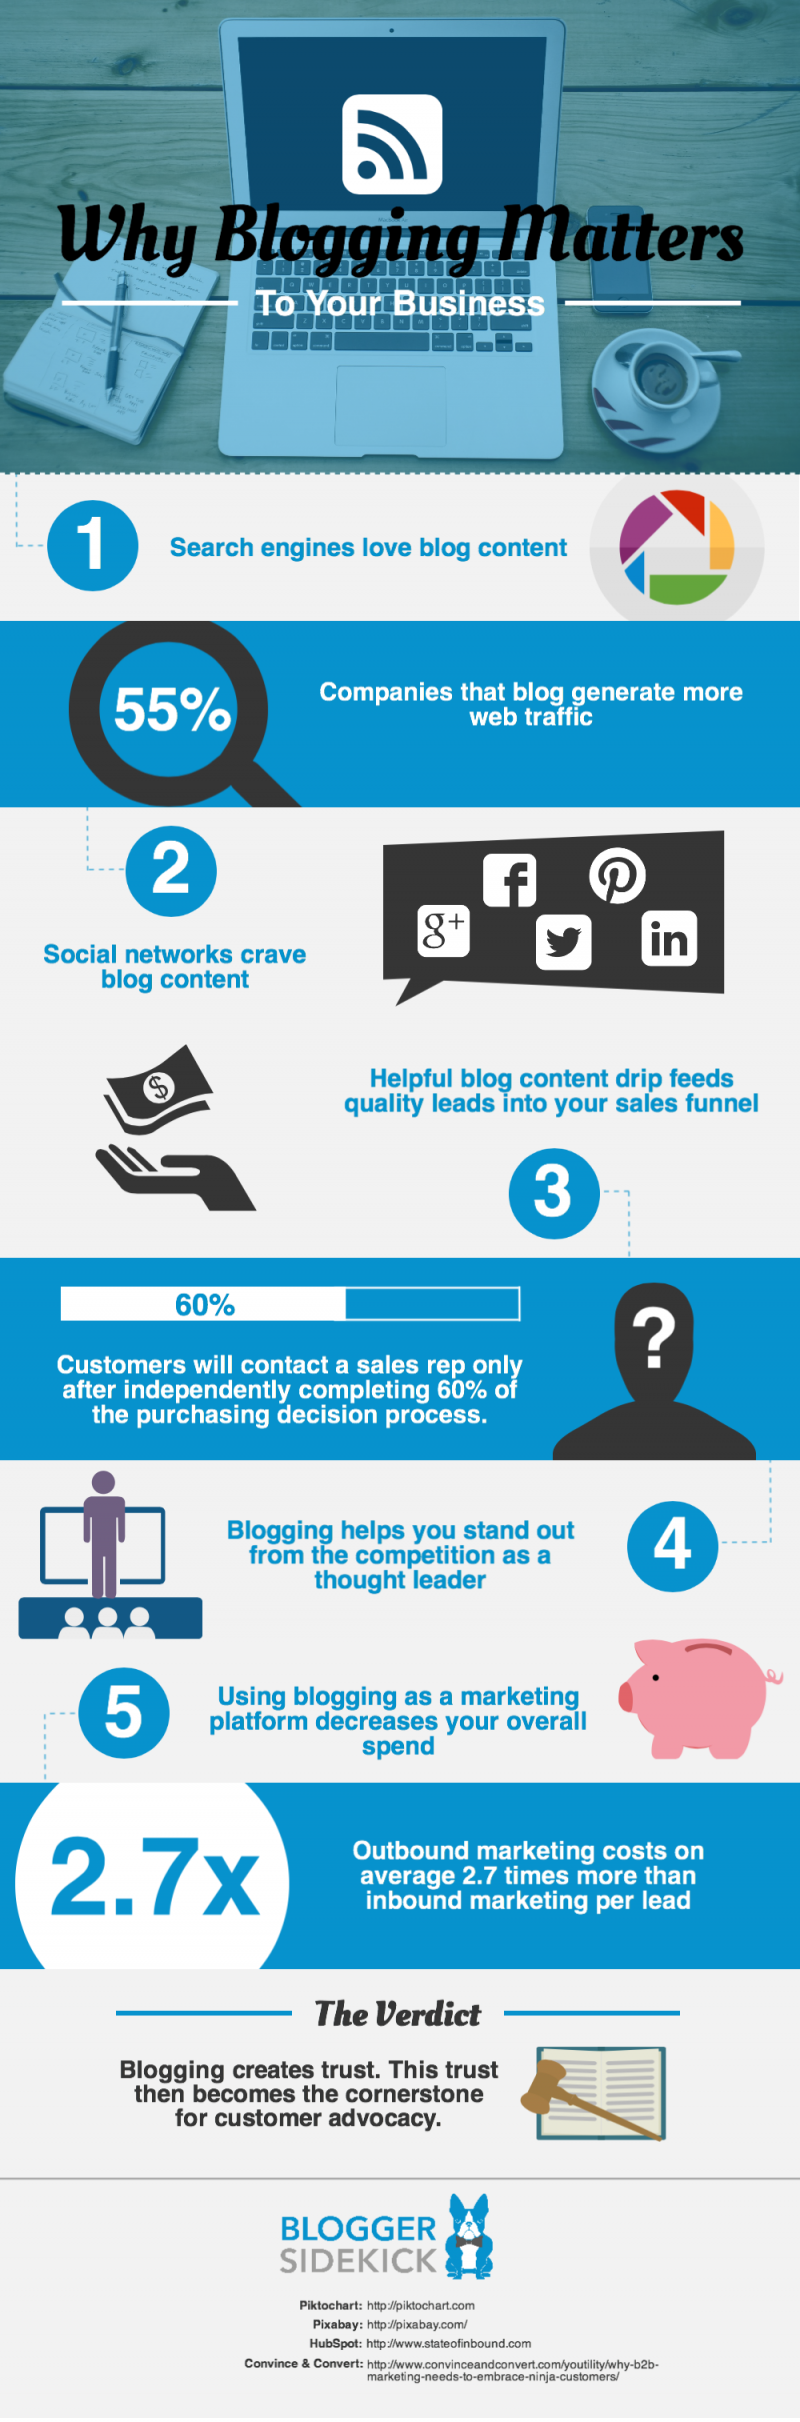 5 Reasons Why Blogging Matters to Your Business [Infographic] image Why Blogging Matters to Your Business1 e1417329604917.png